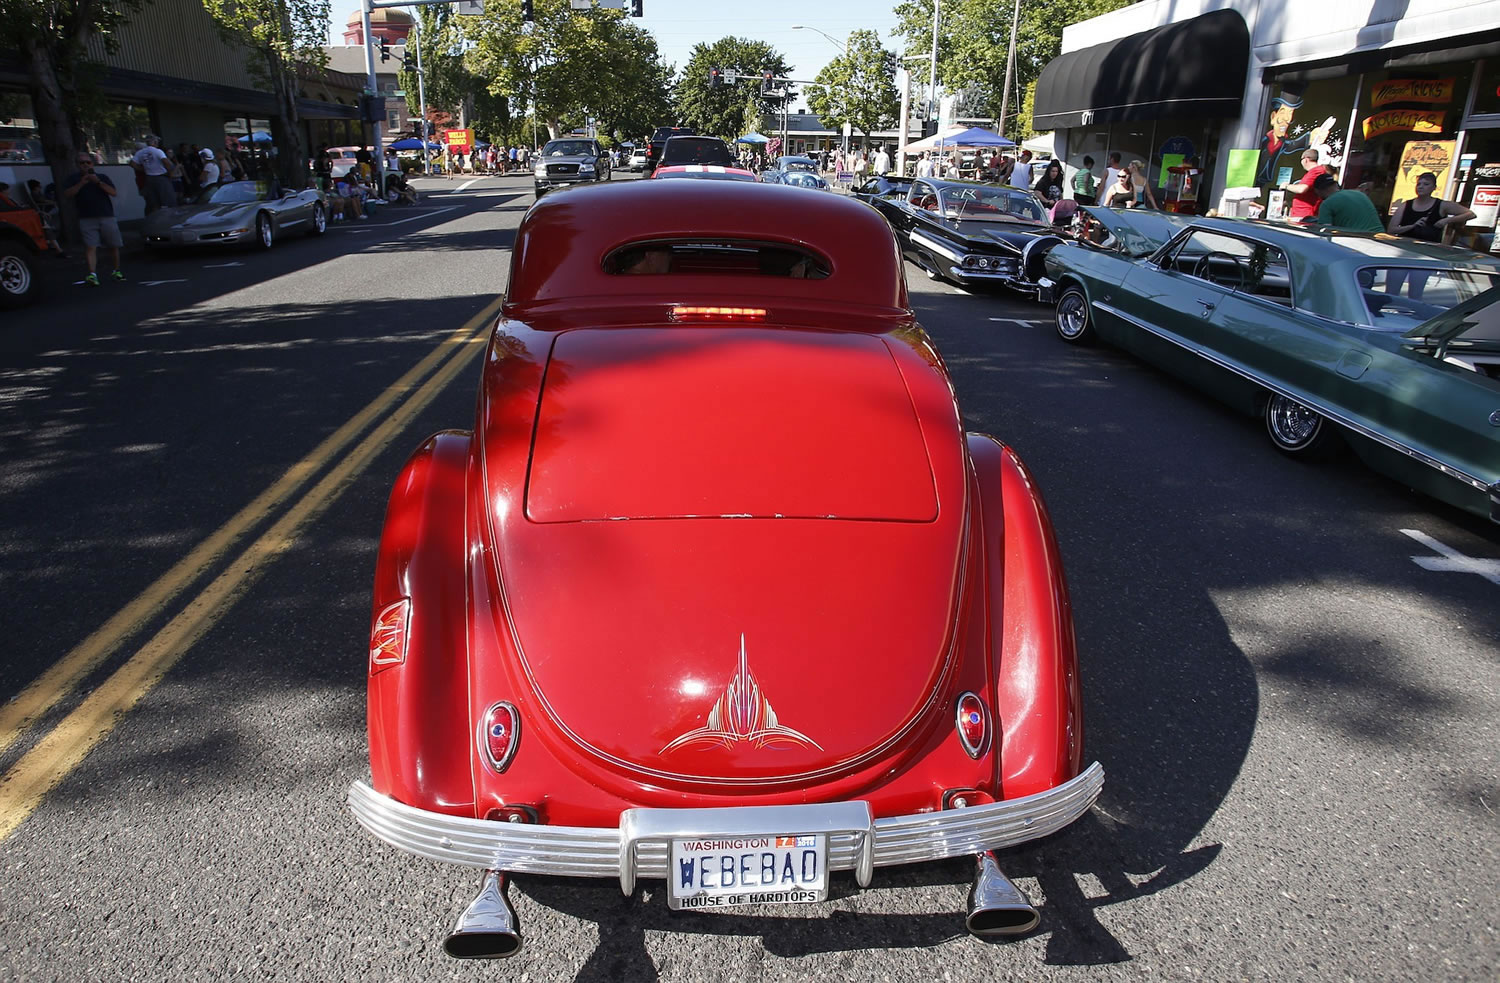 Annual Cruisin' the Gut event brings thousands of folks out to admire a day-long parade of classic cars up and down Main Street.